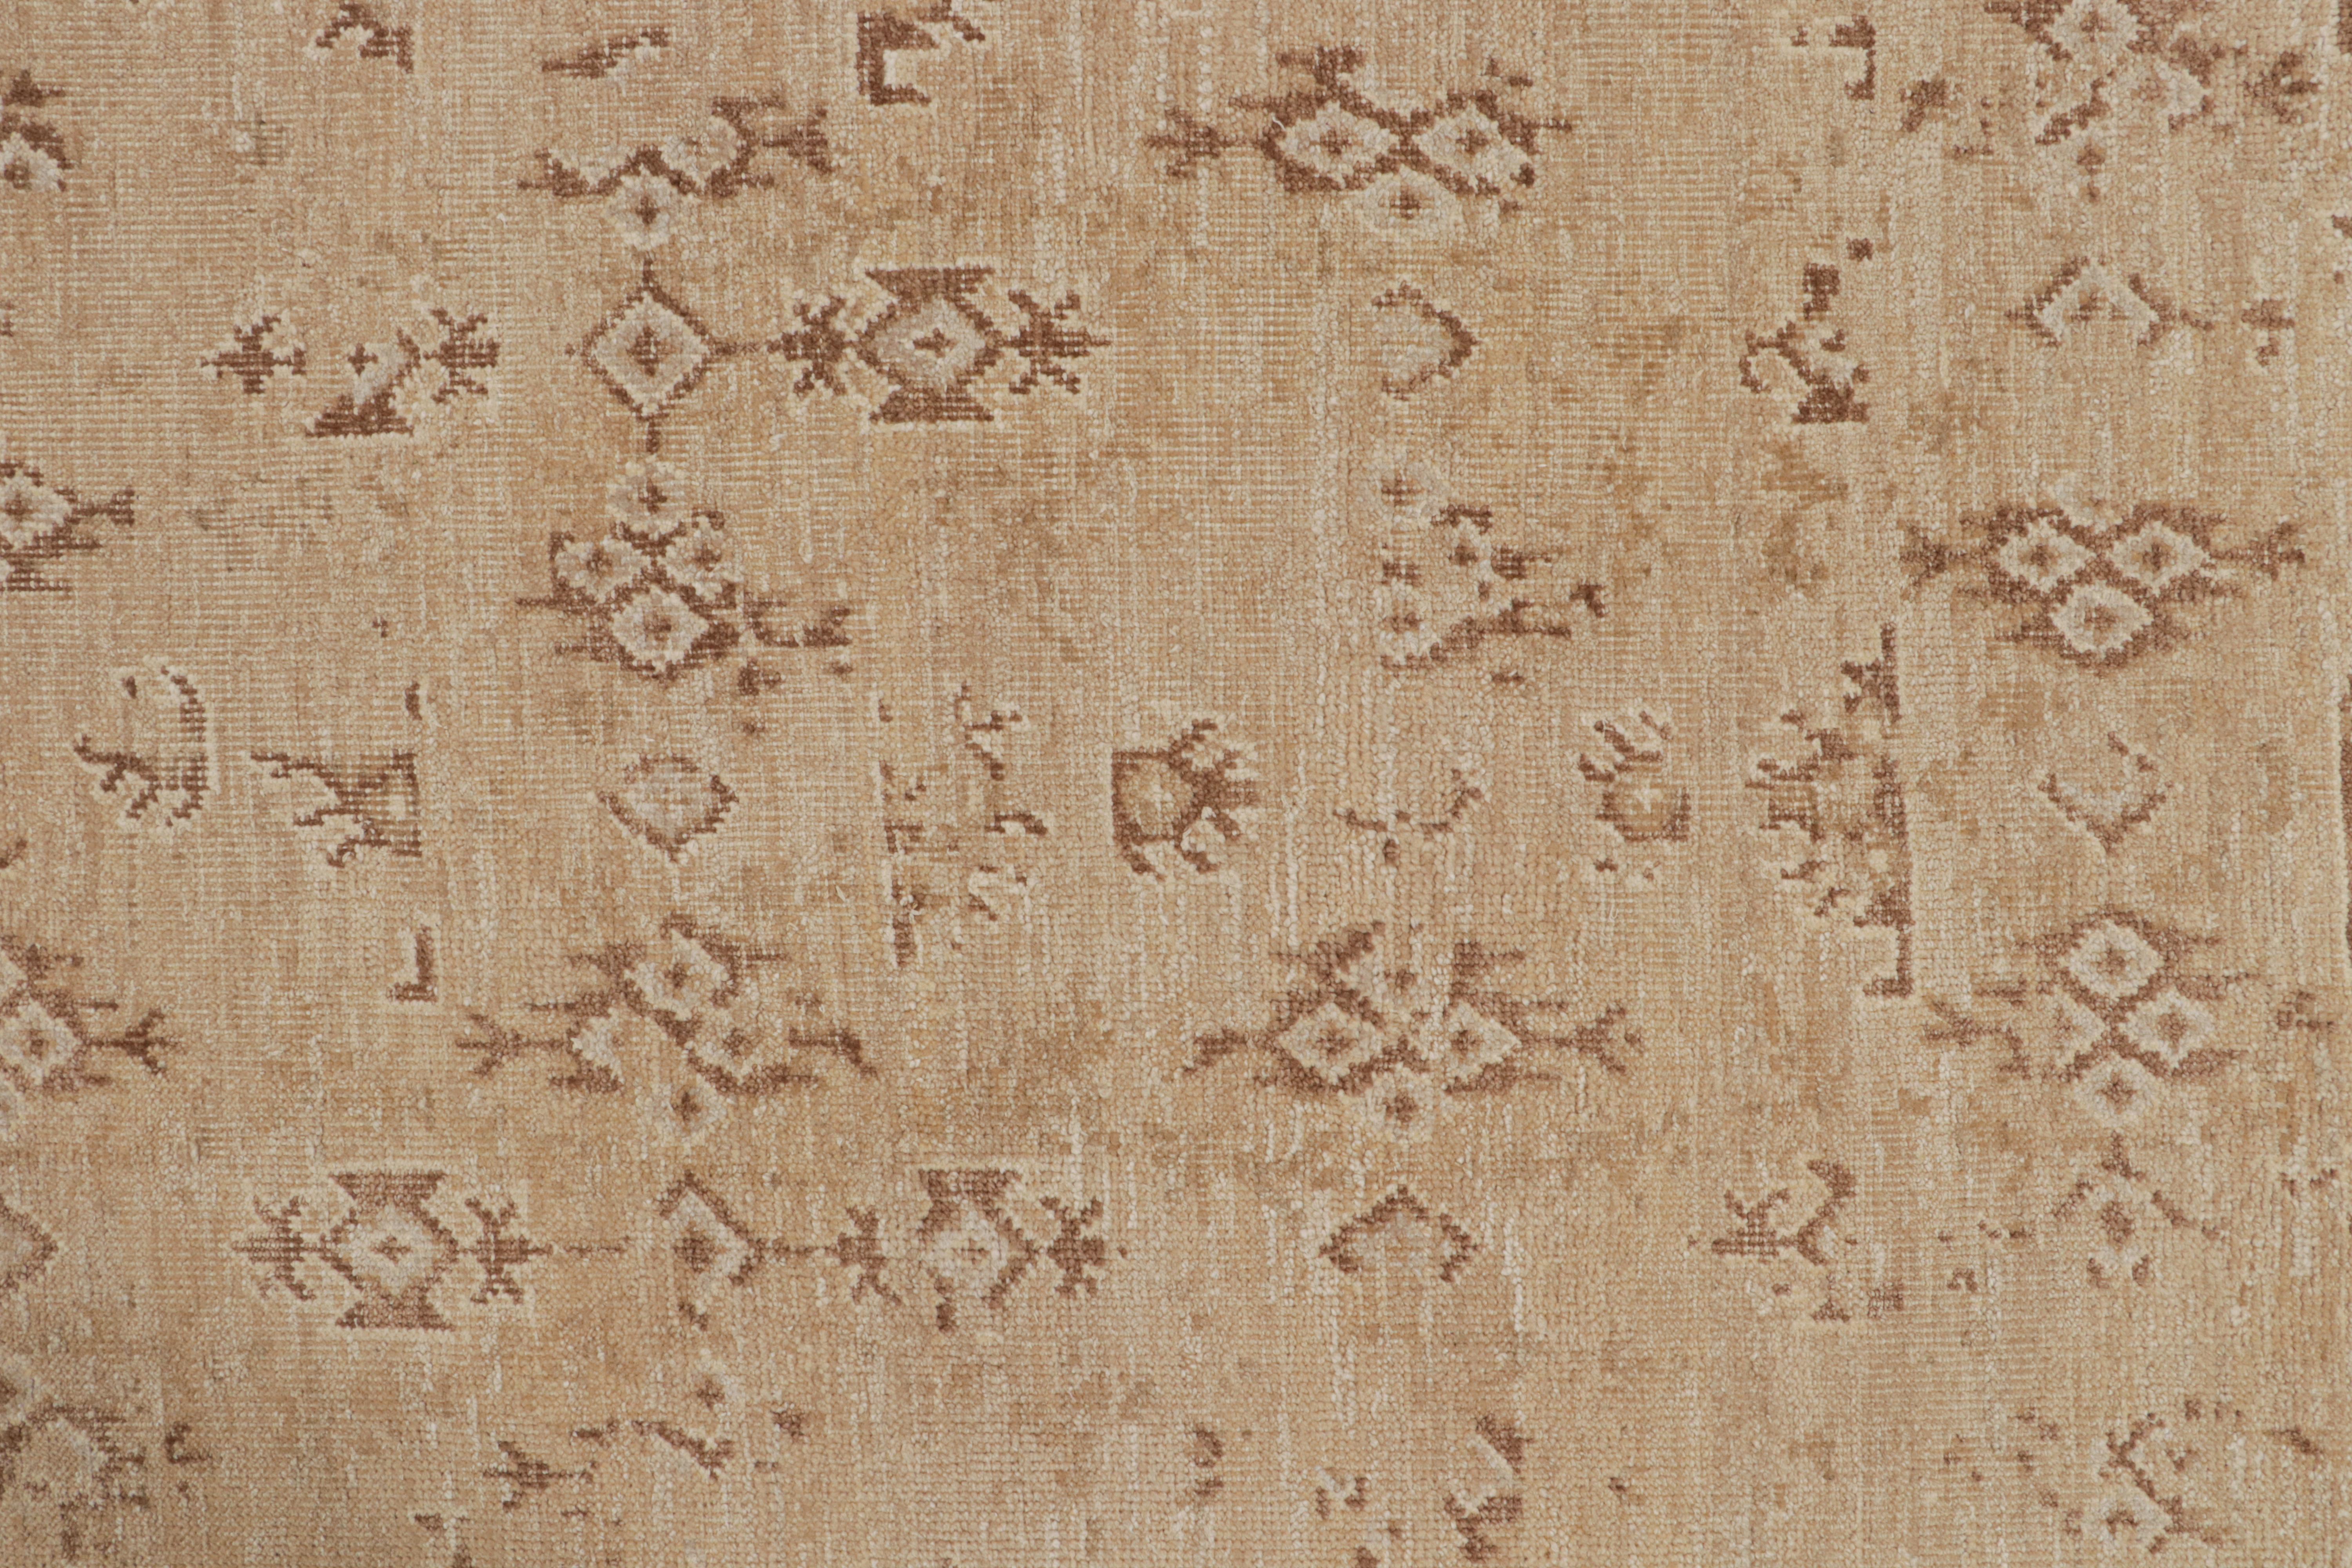 Contemporary Rug & Kilim’s Oushak Style Oversized Rug in Taupe with Floral Patterns For Sale